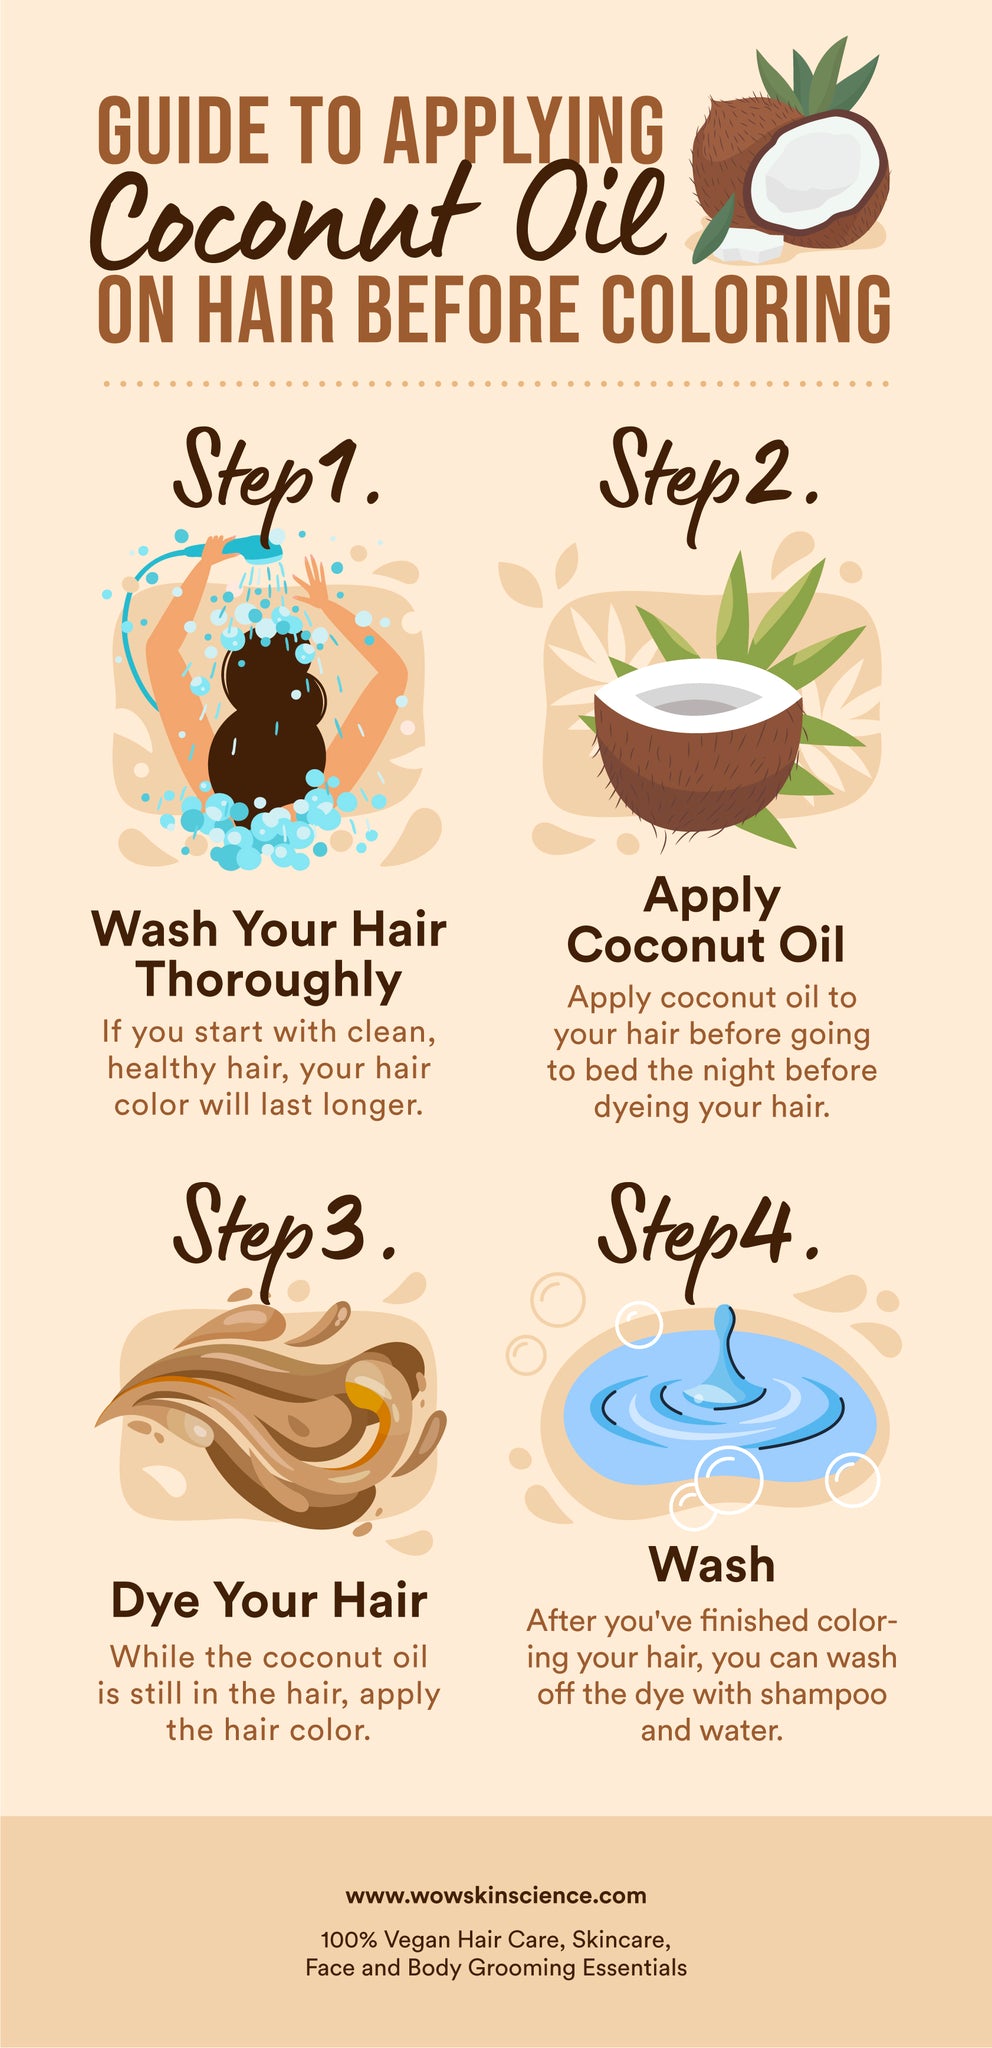 Can I Apply Coconut Oil Before Coloring Hair?